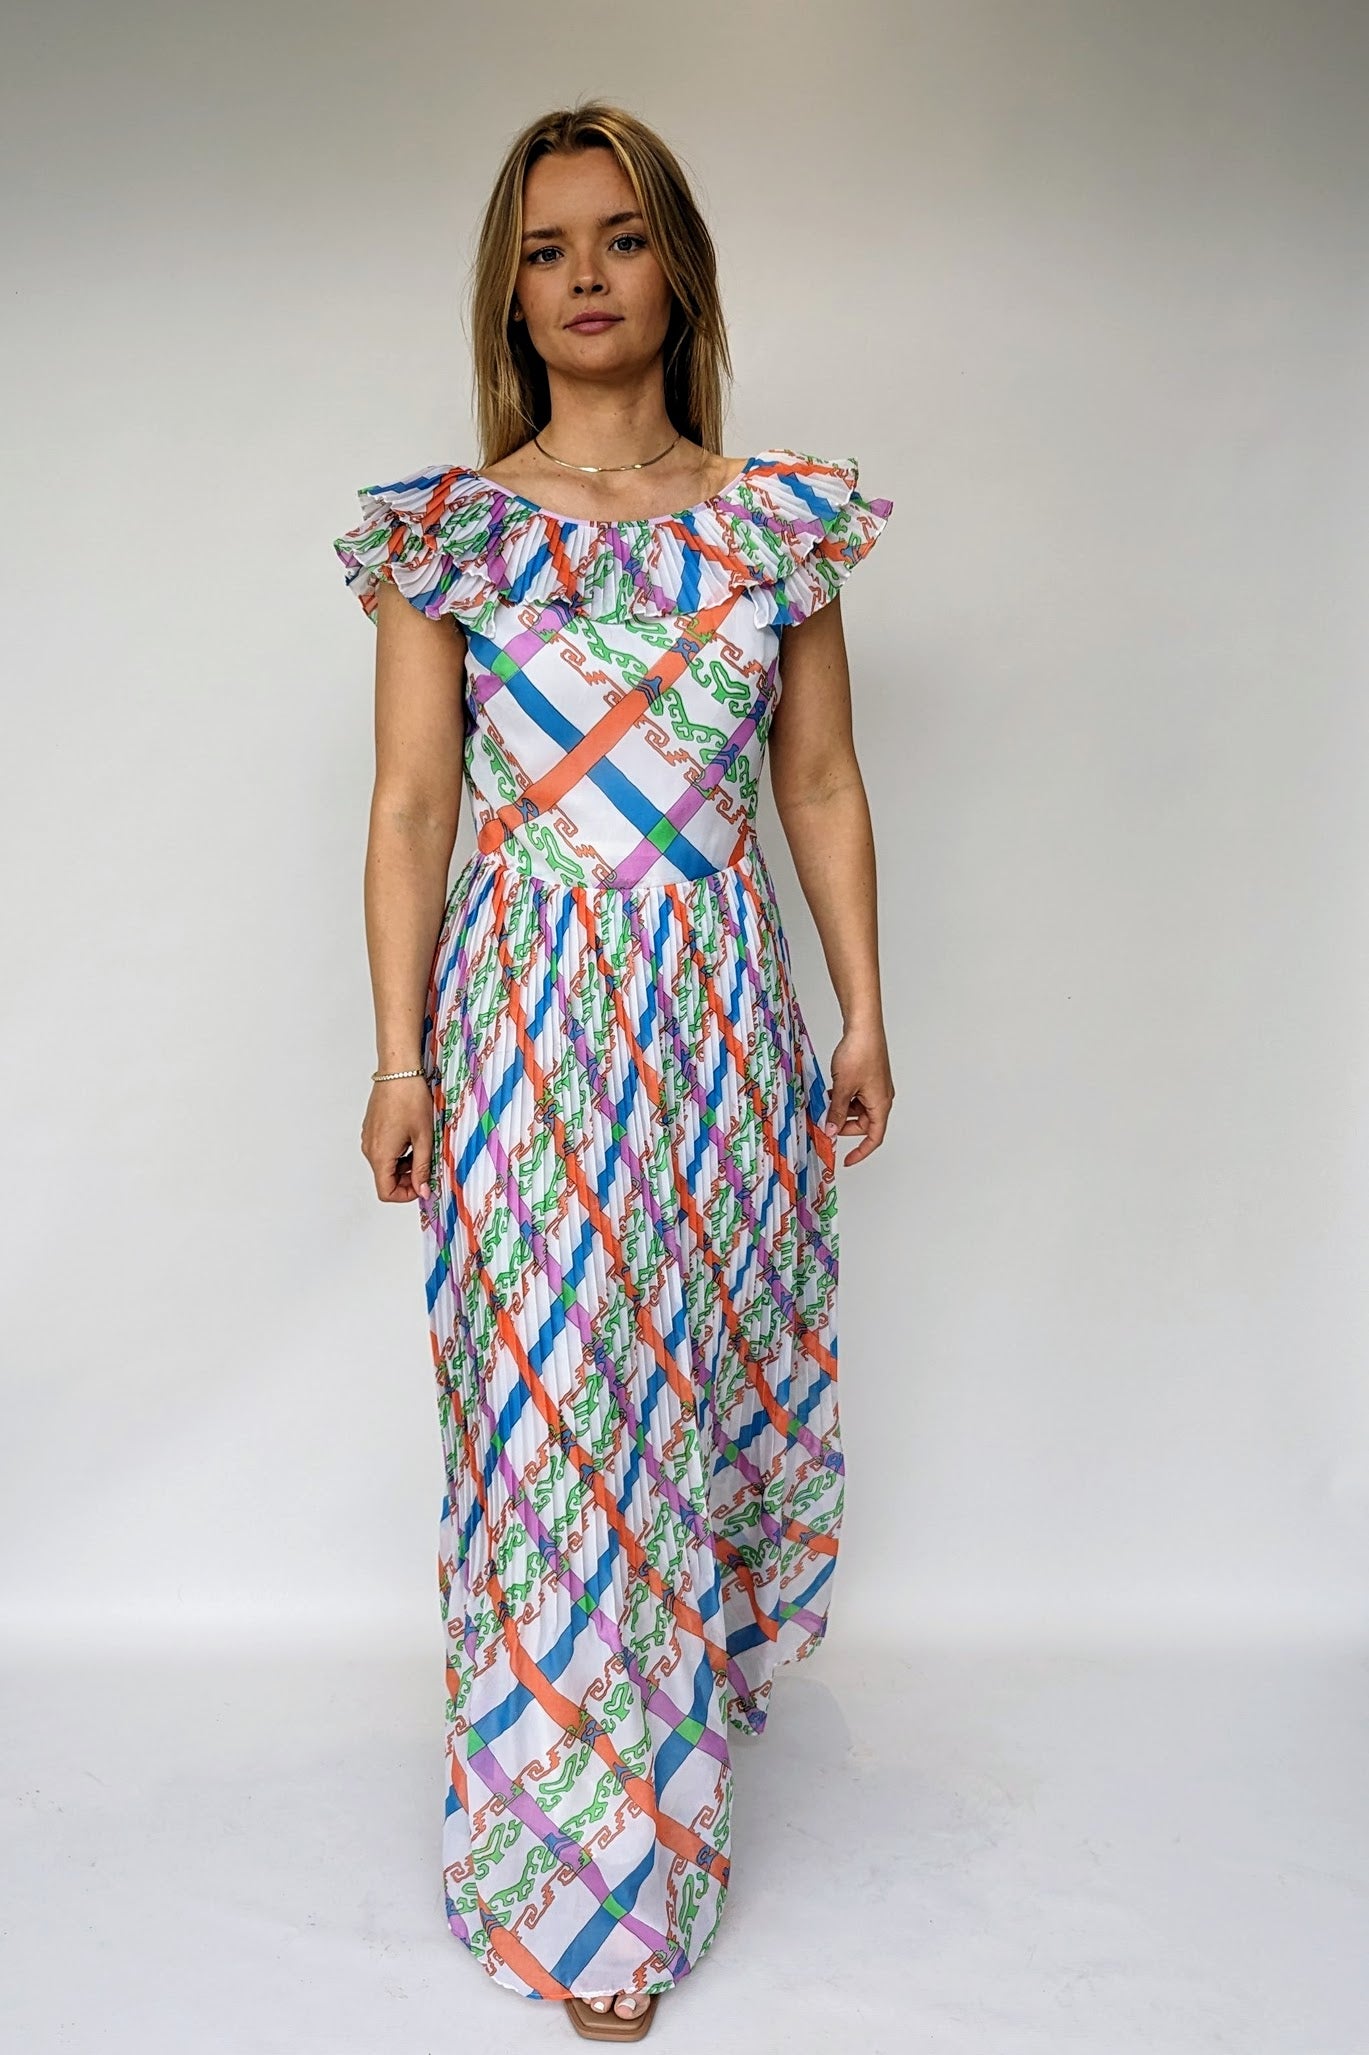 vintage 1970s maxi dress with bold pattern of orange, green, blue and purple geometric pattern